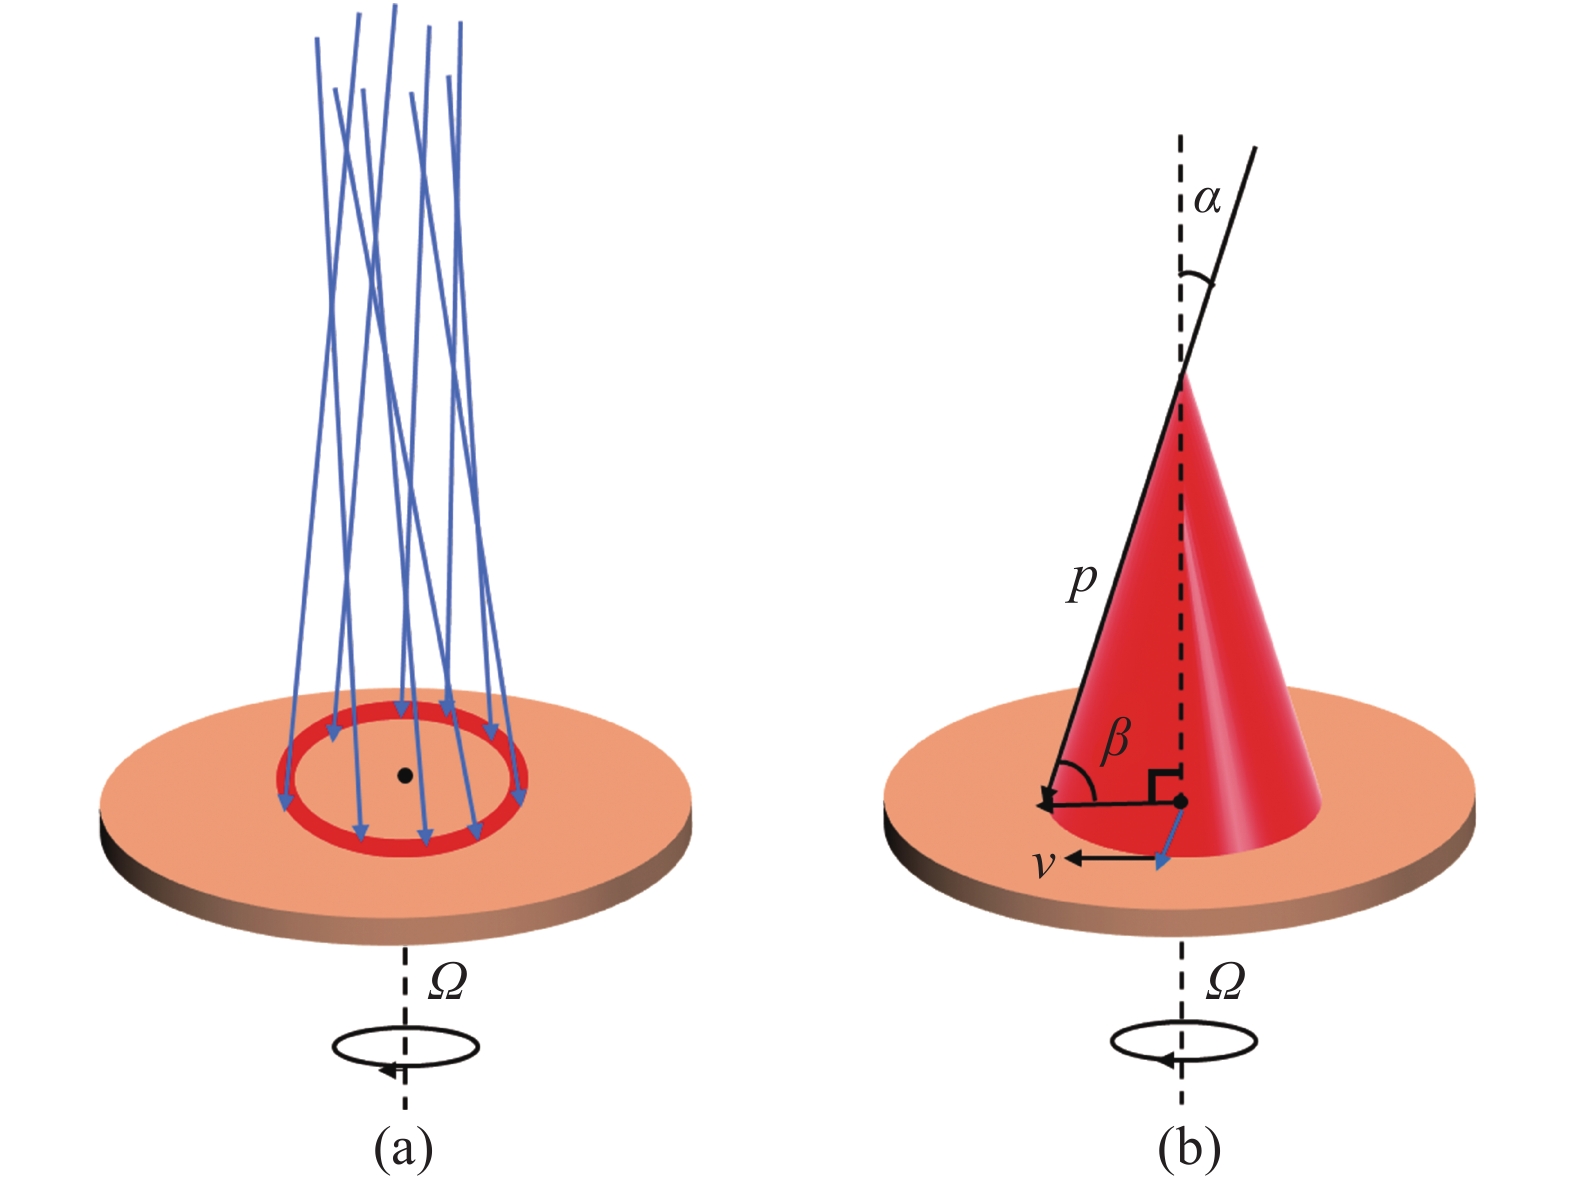 (a) A vortex beam illuminates on the surface of a rotating object vertically; (b) Pointing vector distribution of vortex beam